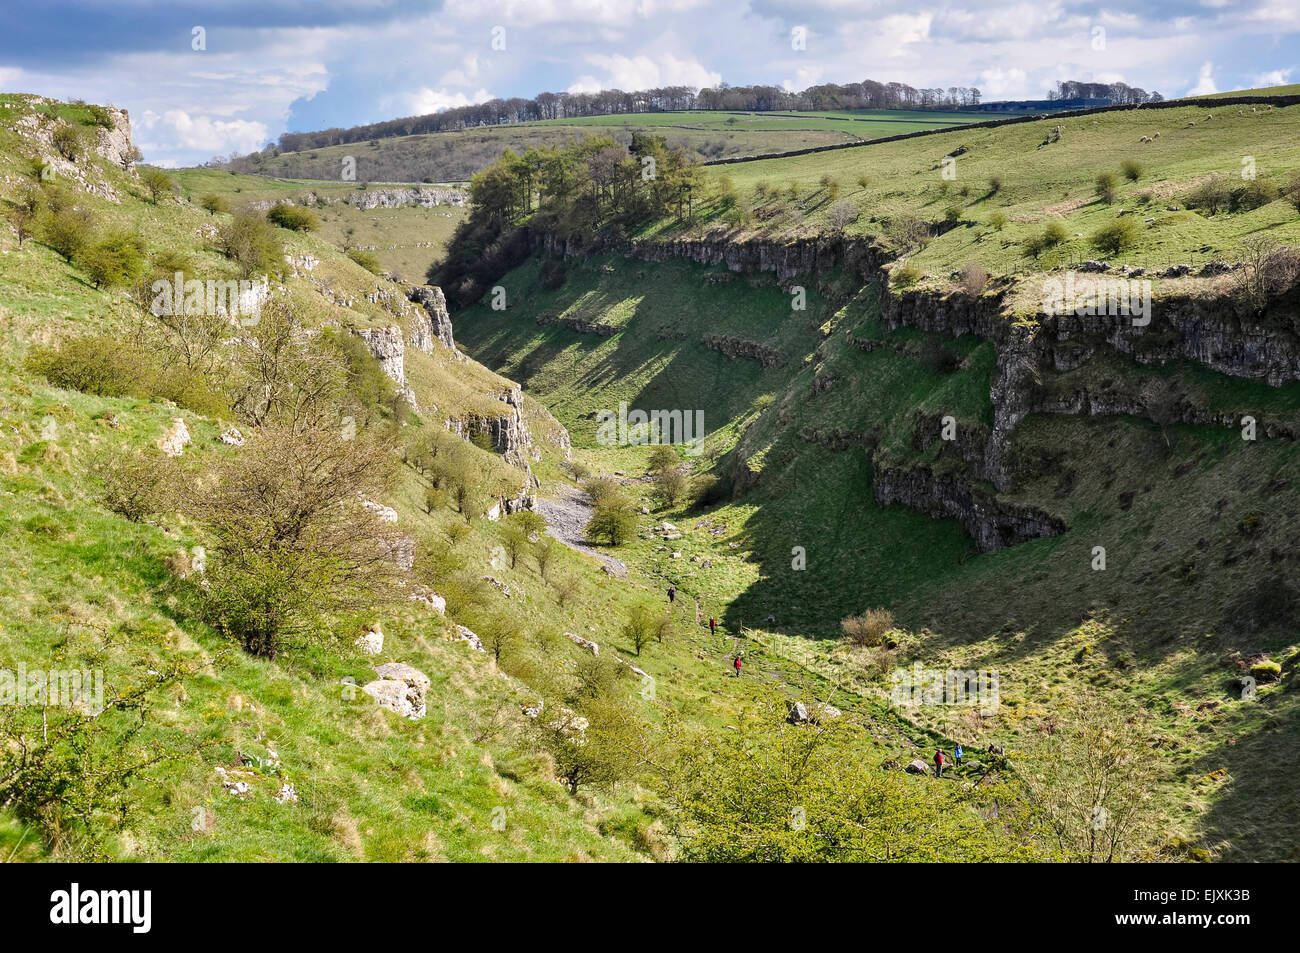 Lathkill Dale in the White Peak. The upper section near the village of Monyash. Dramatic limestone scenery. Stock Photo